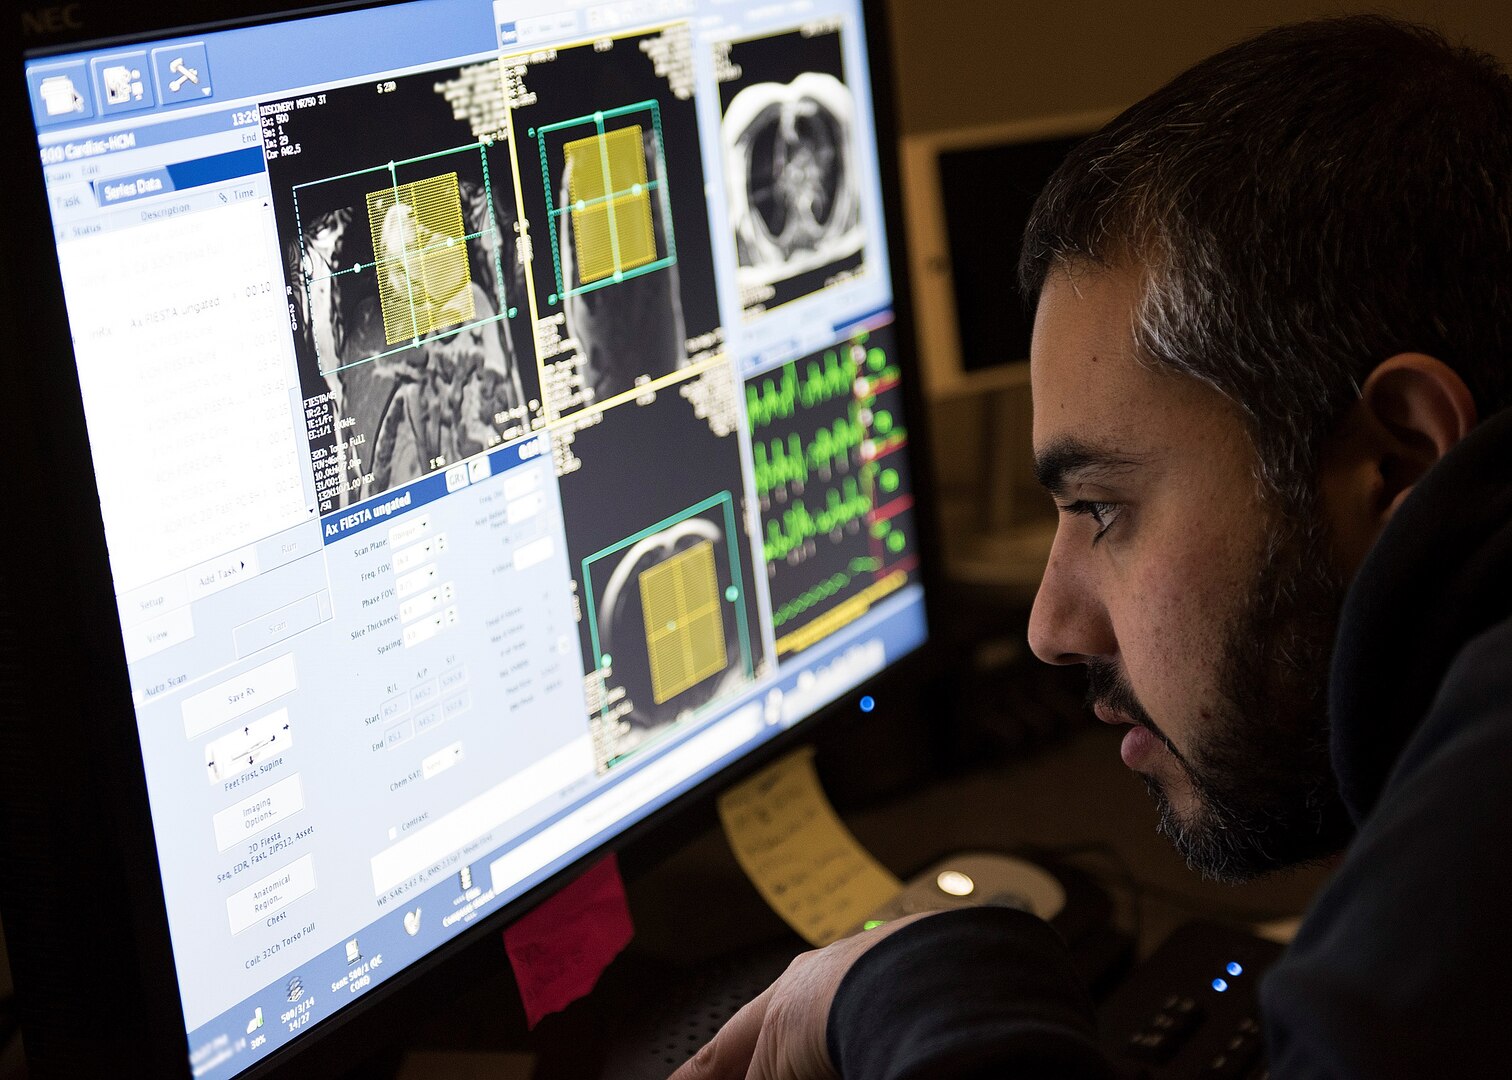 Marvin Perez, 59th Medical Wing cardiac magnetic resonance imaging technologist, observes a patient’s vitals during a scan at Wilford Hall Ambulatory Surgical Center, Joint Base San Antonio-Lackland. Cardiac MRI, which takes approximately 20-45 minutes, is a non-invasive assessment of the function and structure of the heart.